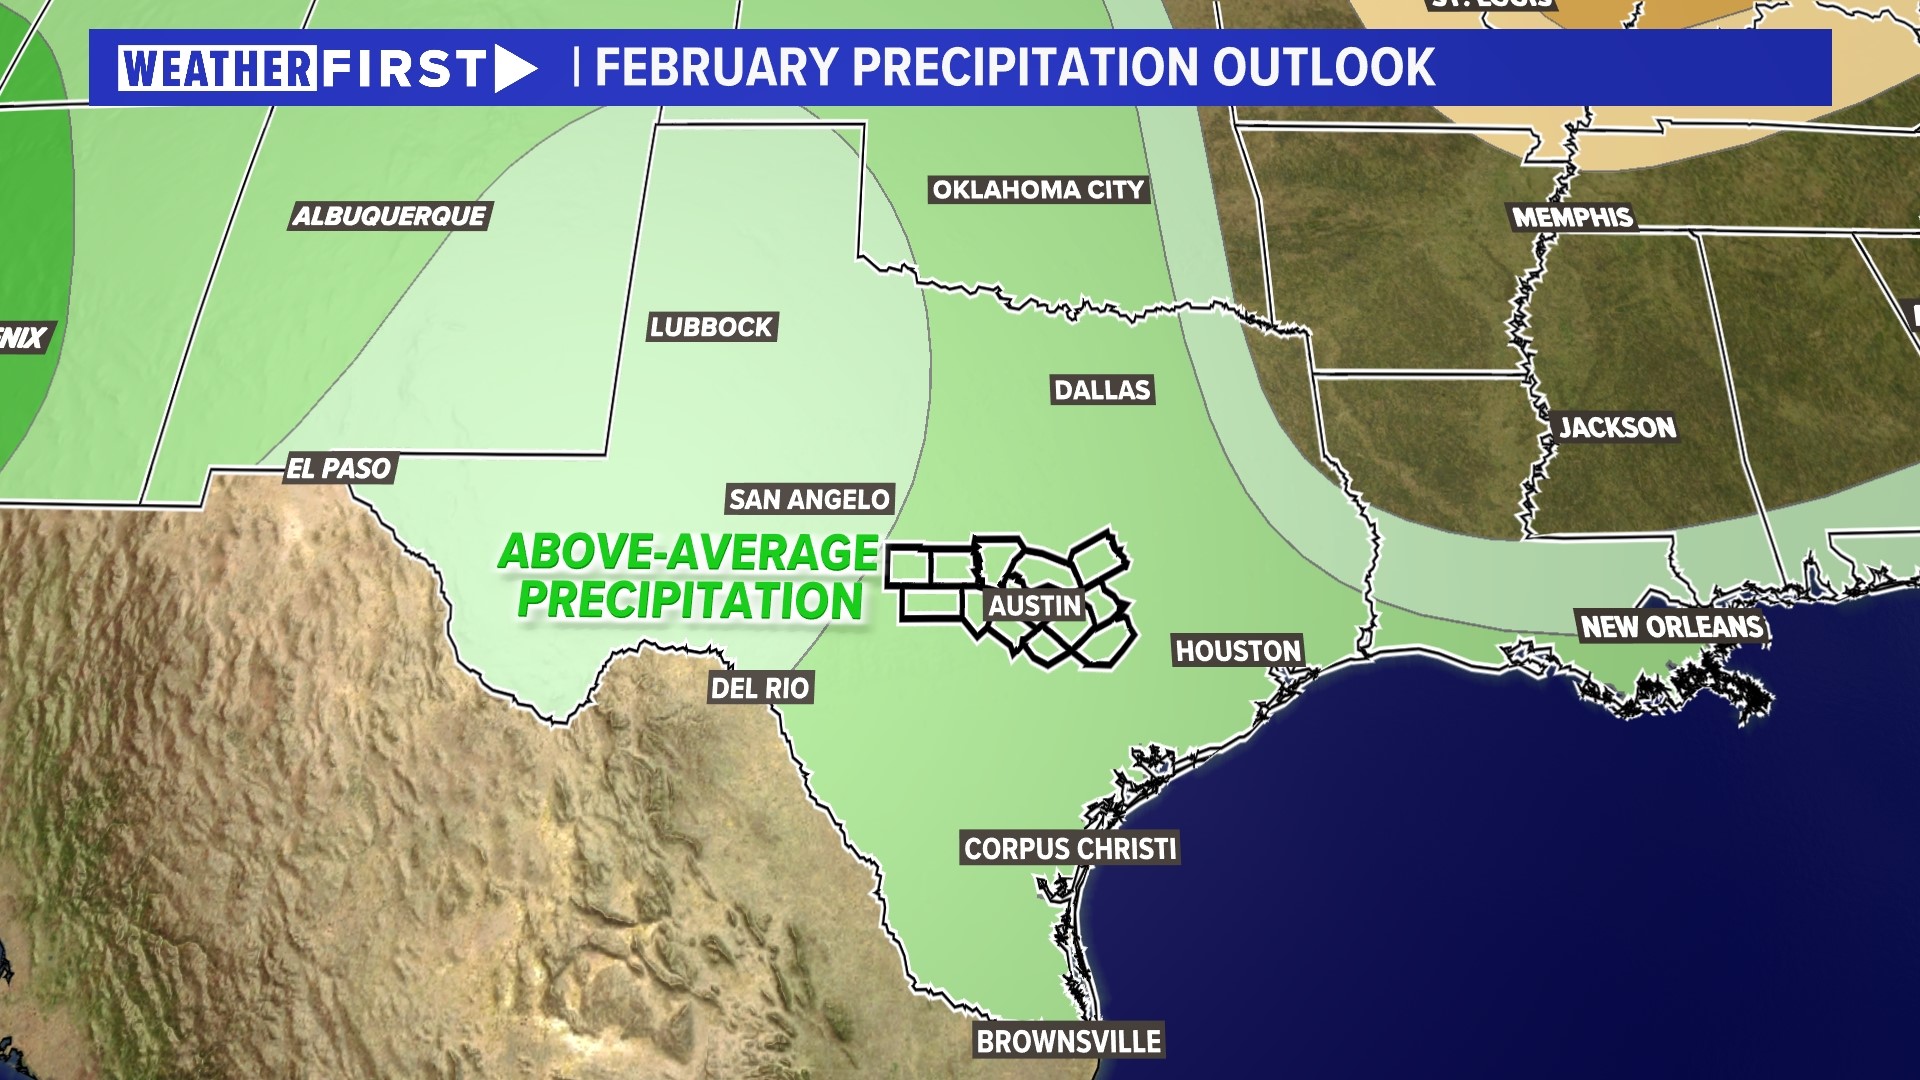 We're expecting temperatures at about average but above-average precipitation